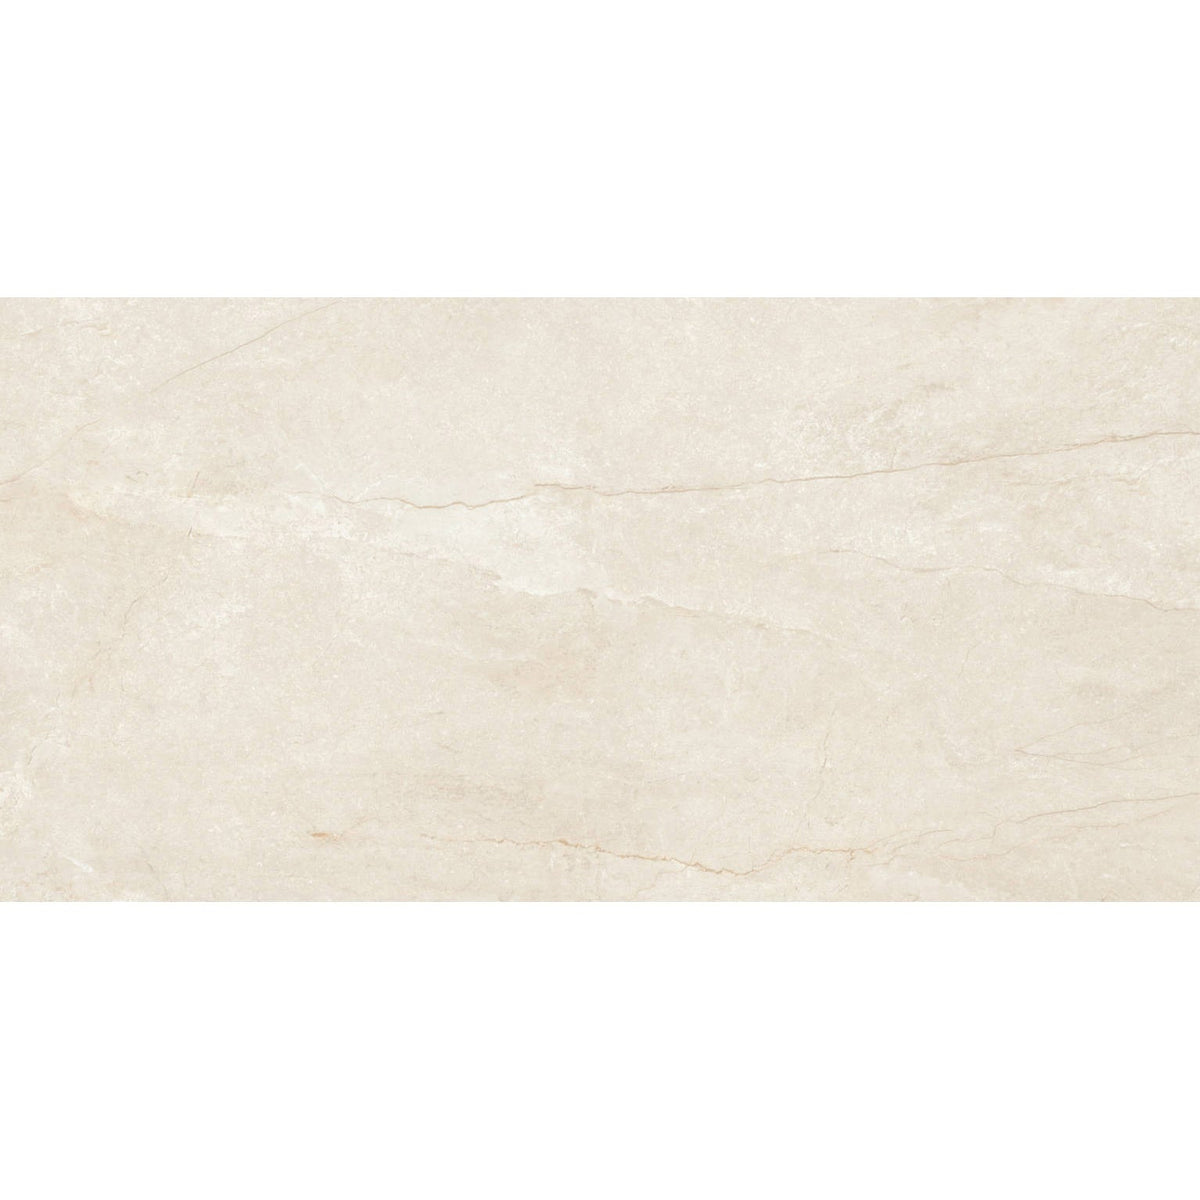 General Ceramic - Wells 12 in. x 24 in. Rectified Porcelain Tile - Ivory Polished